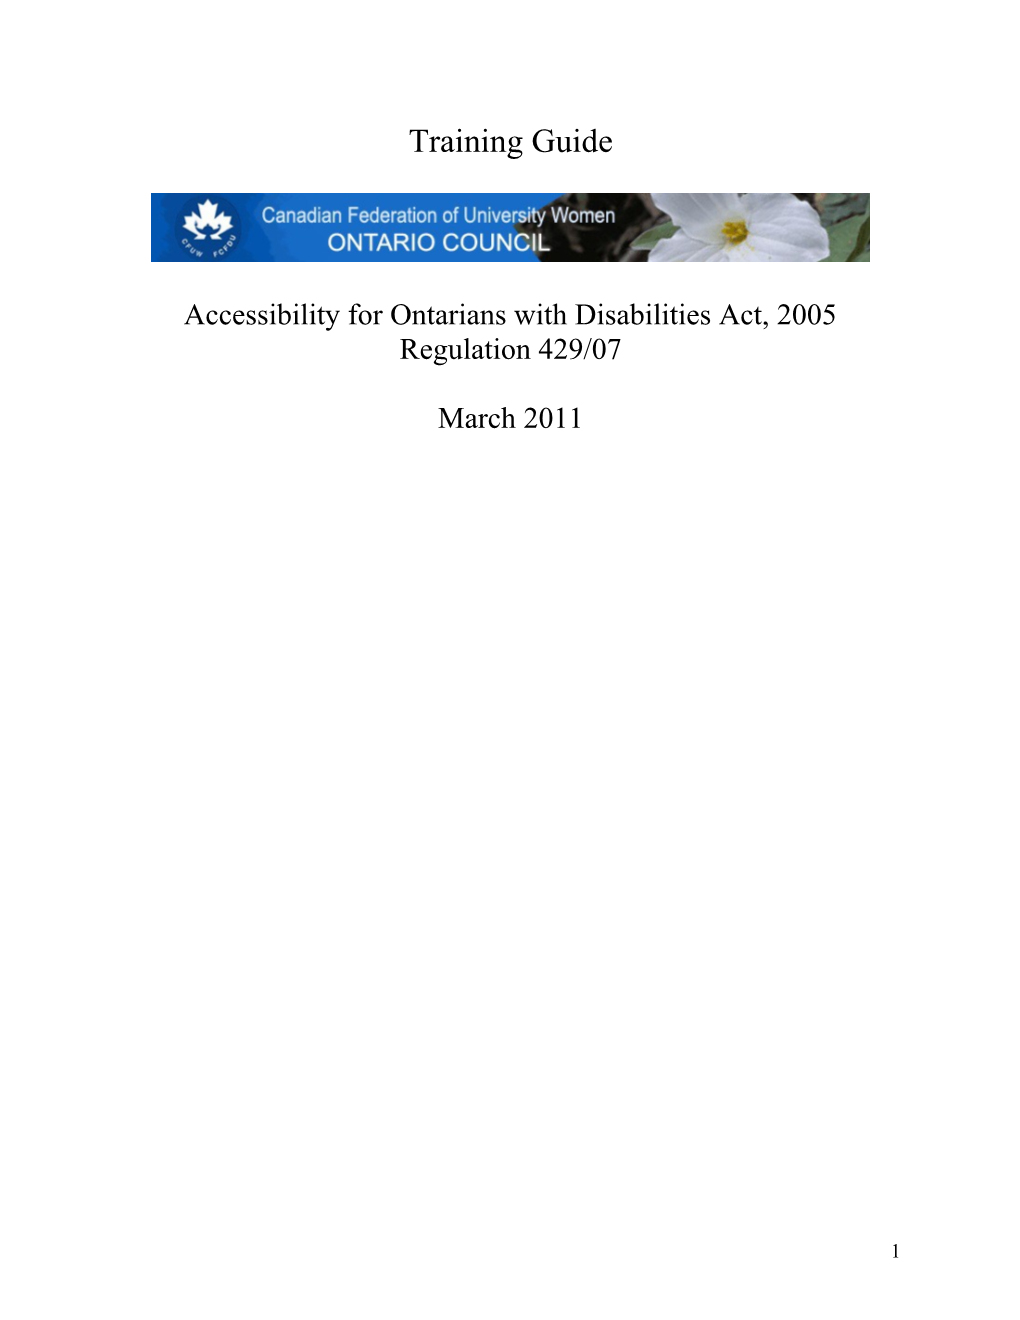 Accessibility for Ontarians with Disabilities Act, 2005